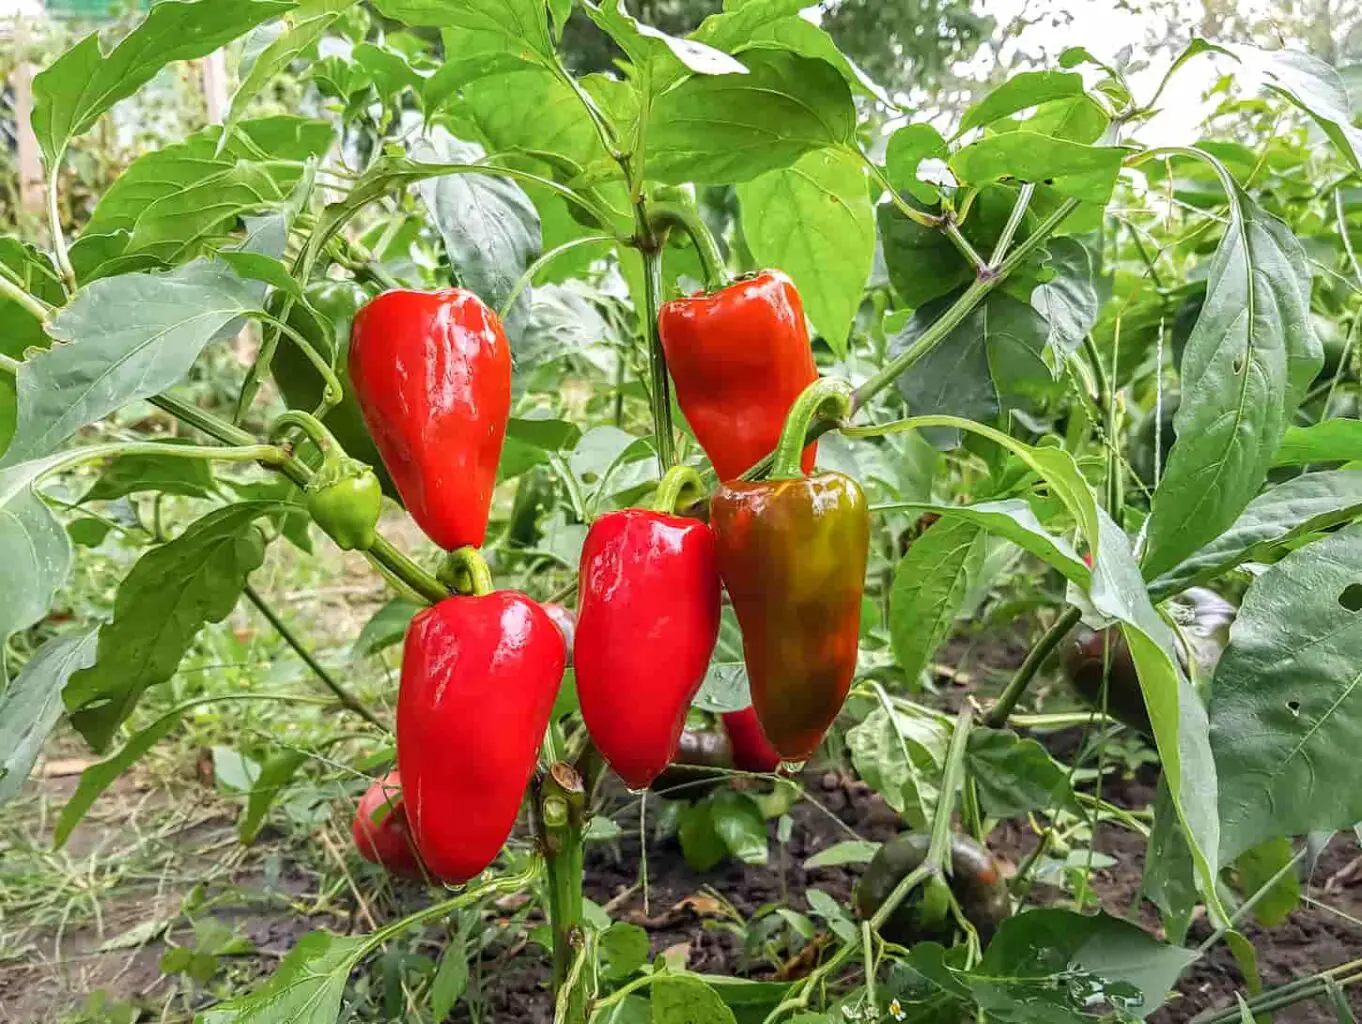 An image of Red bell peppers in the vegetable garden.